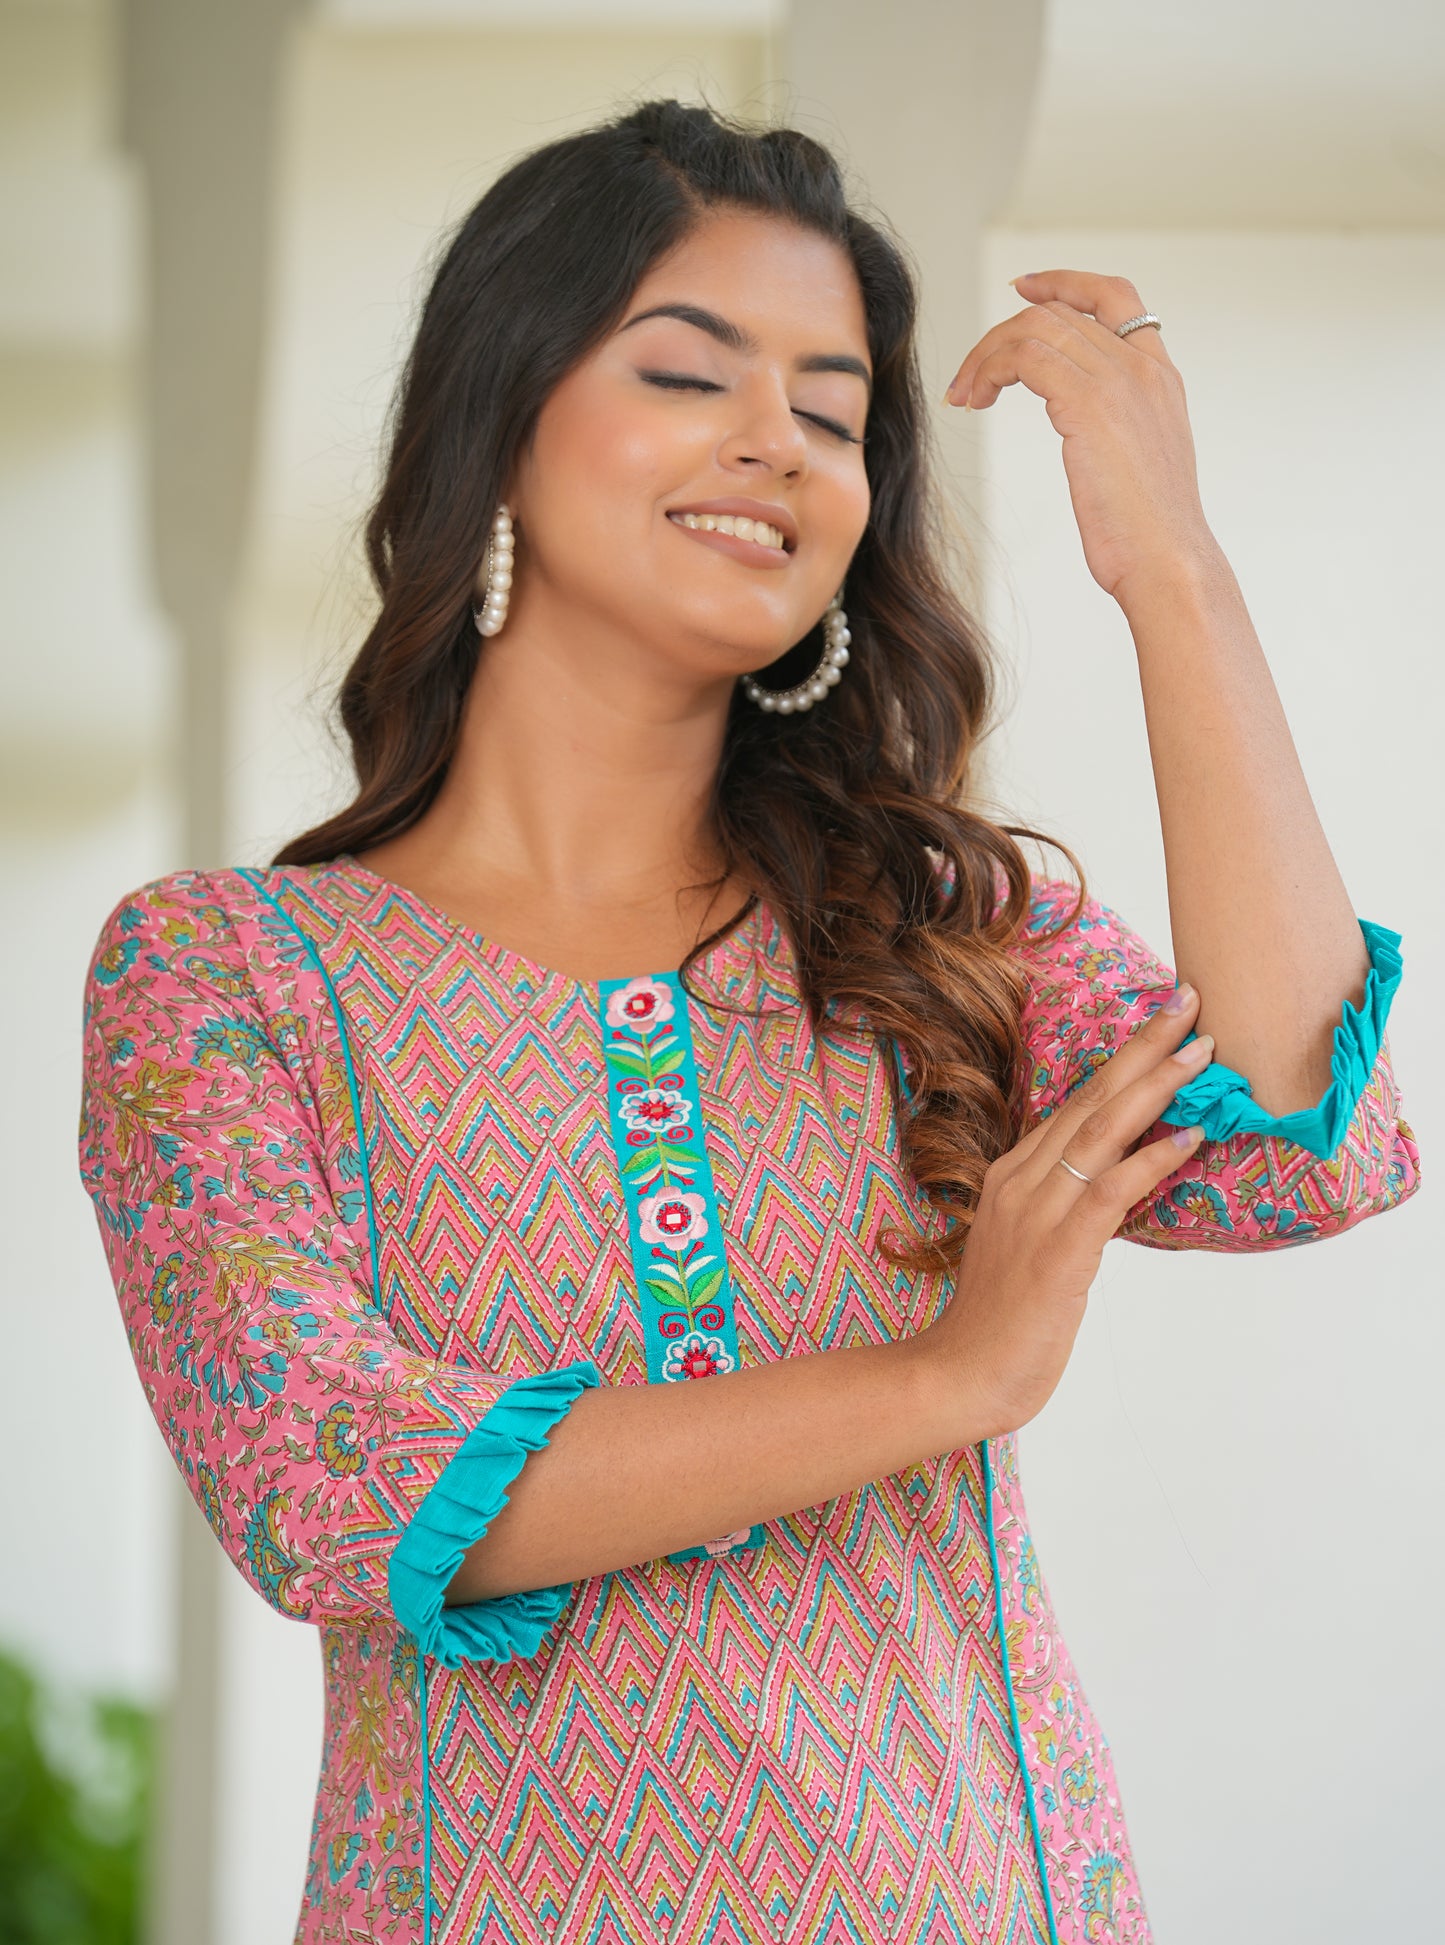 womens embroidered floral printed a line kurta pink